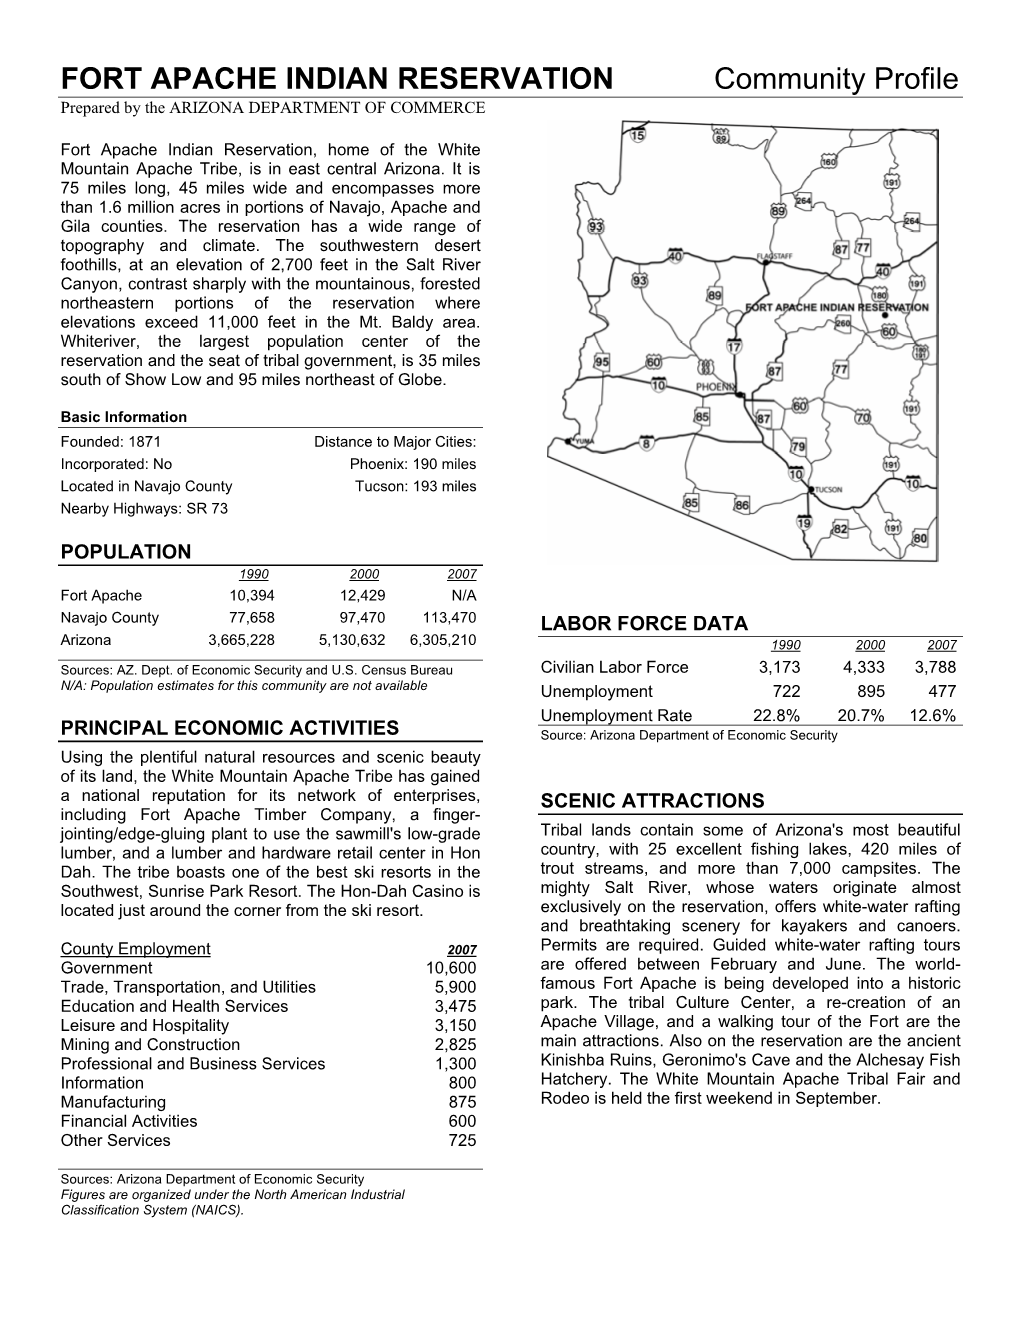 FORT APACHE INDIAN RESERVATION Community Profile Prepared by the ARIZONA DEPARTMENT of COMMERCE